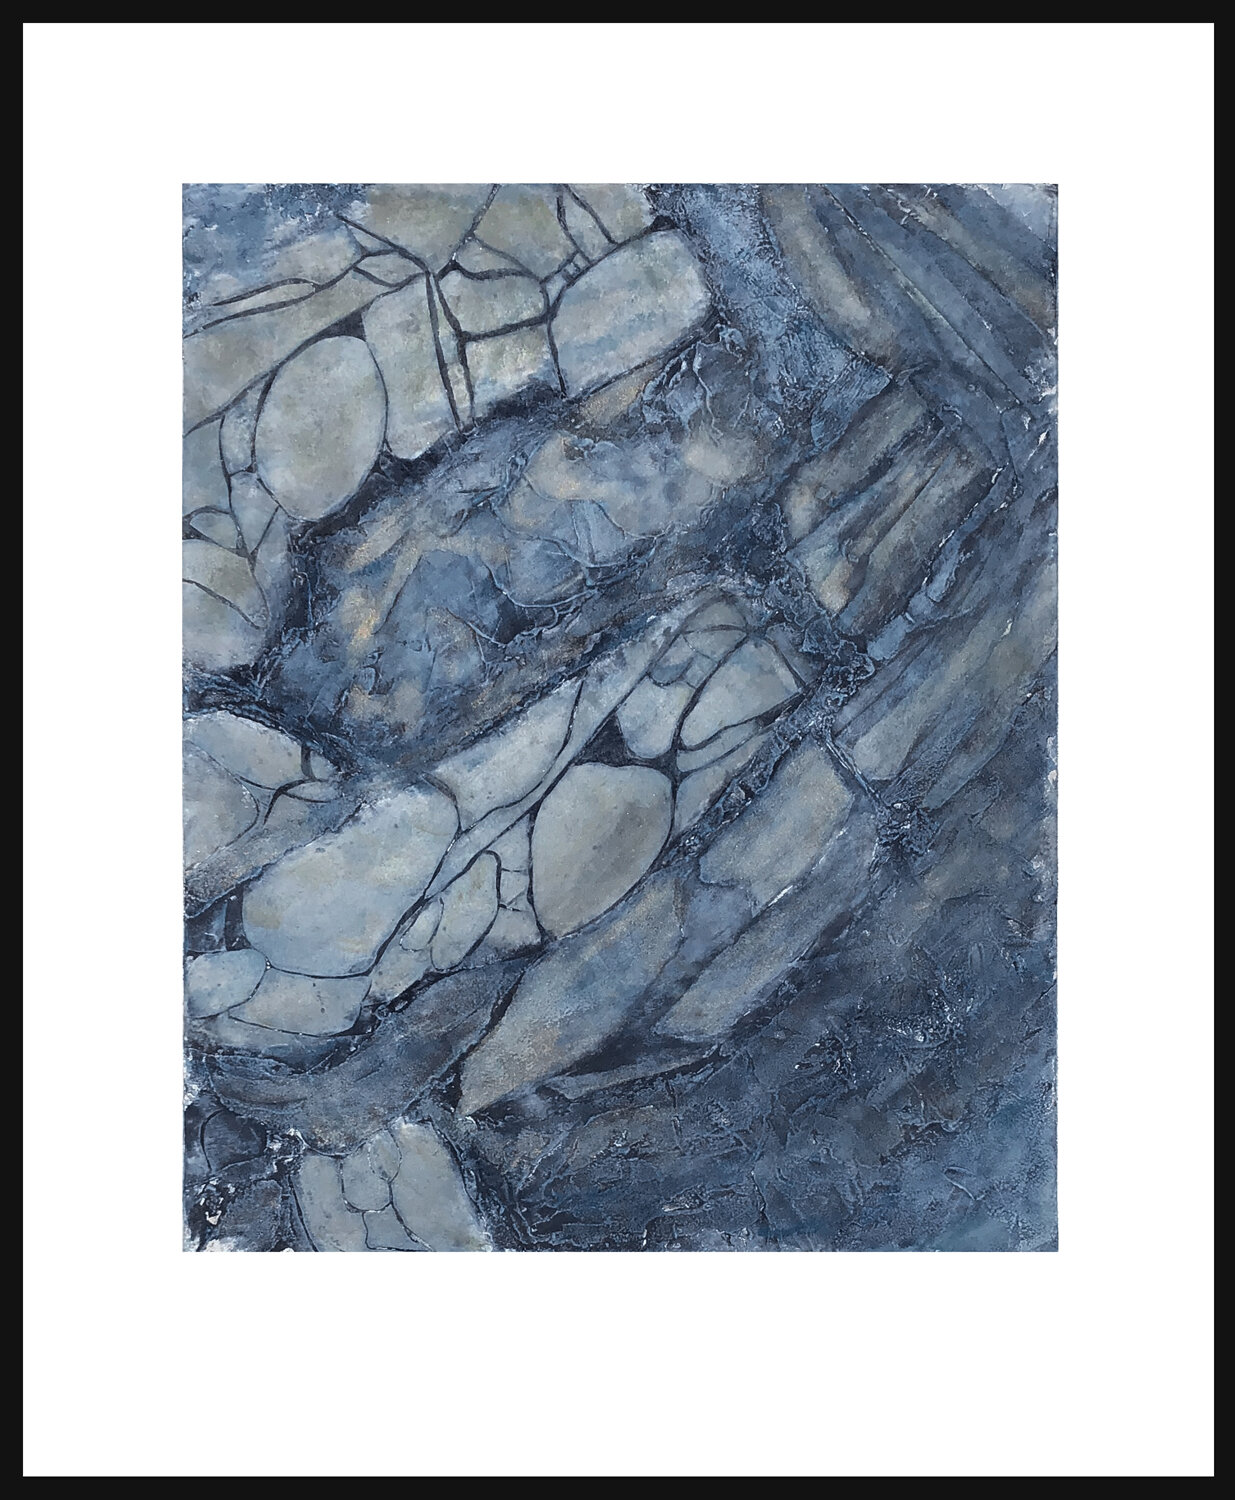    In the Midst of Calm   I love the river and the sound of the flow of the river between the rocks. It’s a calming place…I hope this renders that feeling for you too. 28.75 x 23.75, collagraph, 1/1   $565 - SOLD  